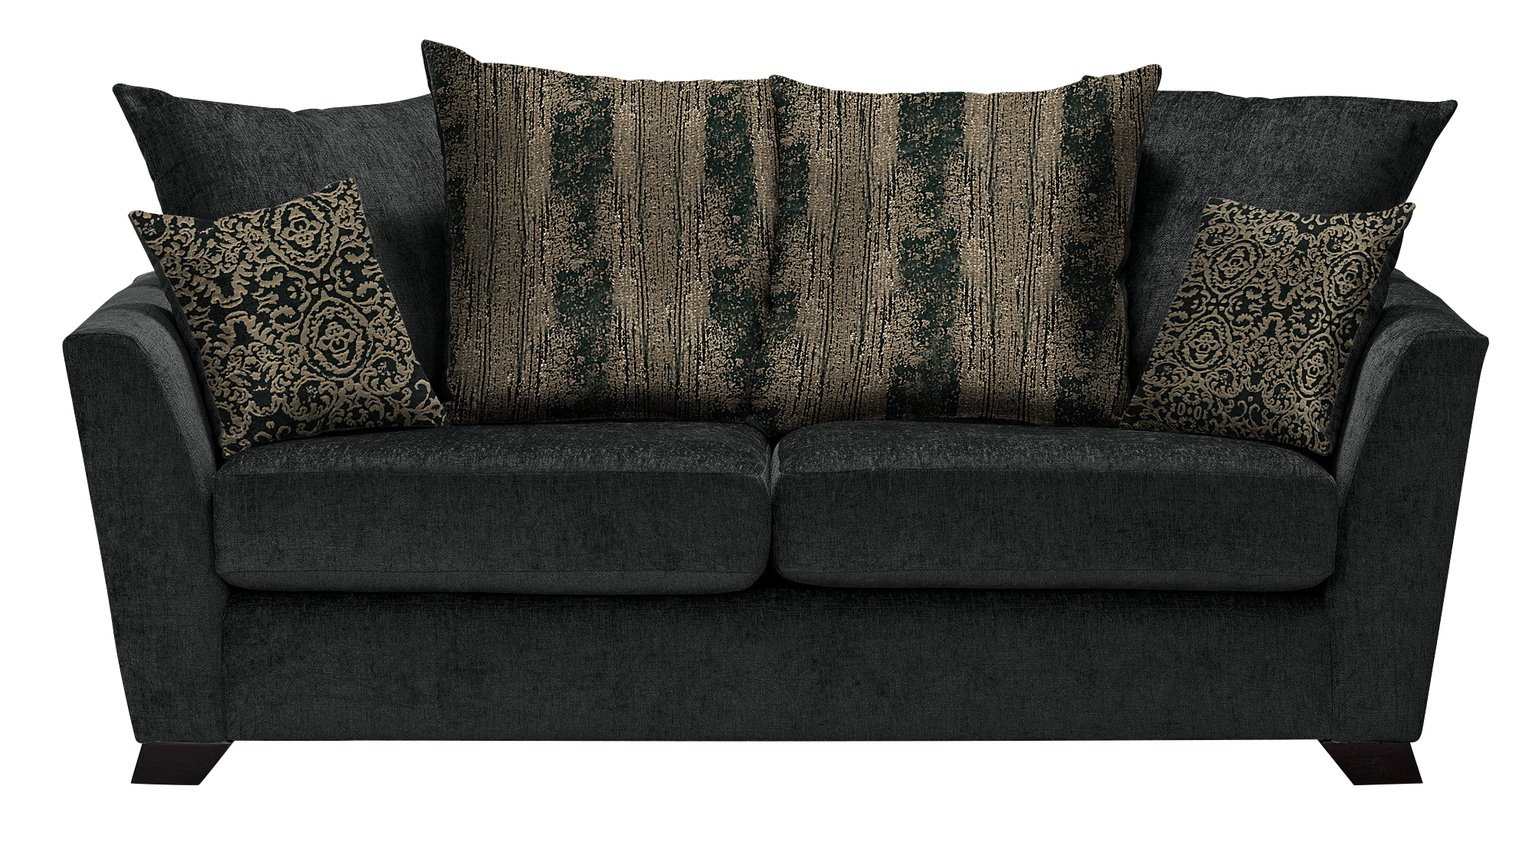 Argos Home Vivienne 3 Seater Fabric Sofa - Black and Gold